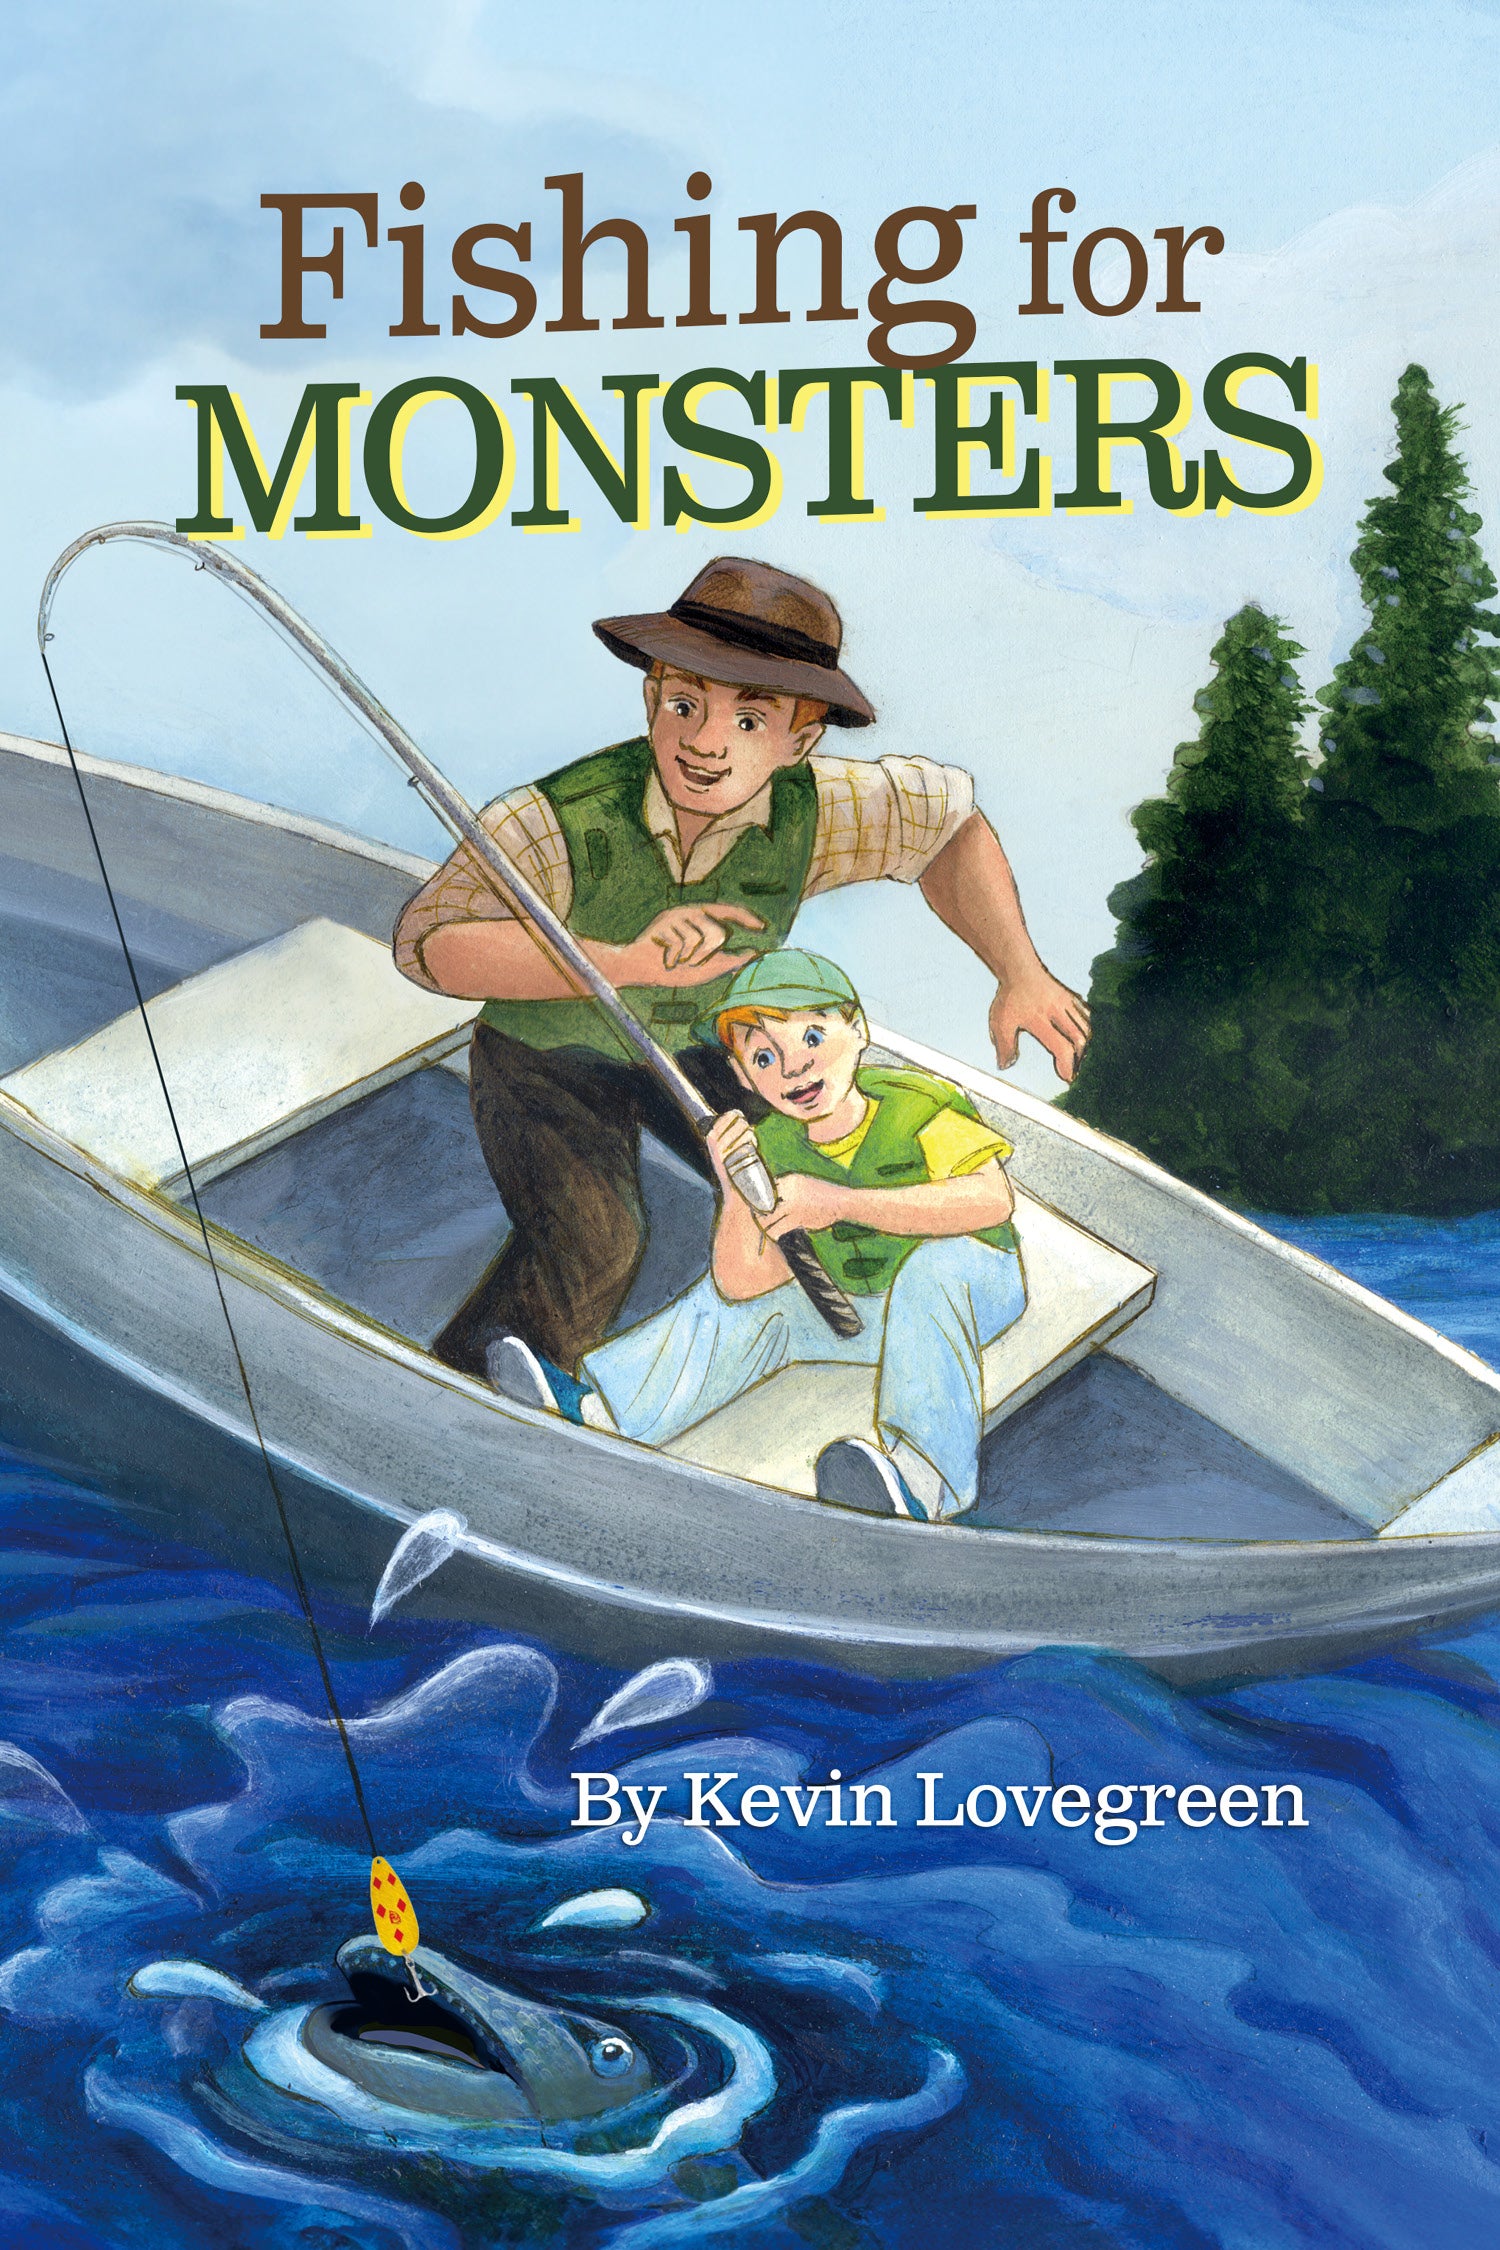 Fishing for Monsters (New Release) – Kevin Lovegreen